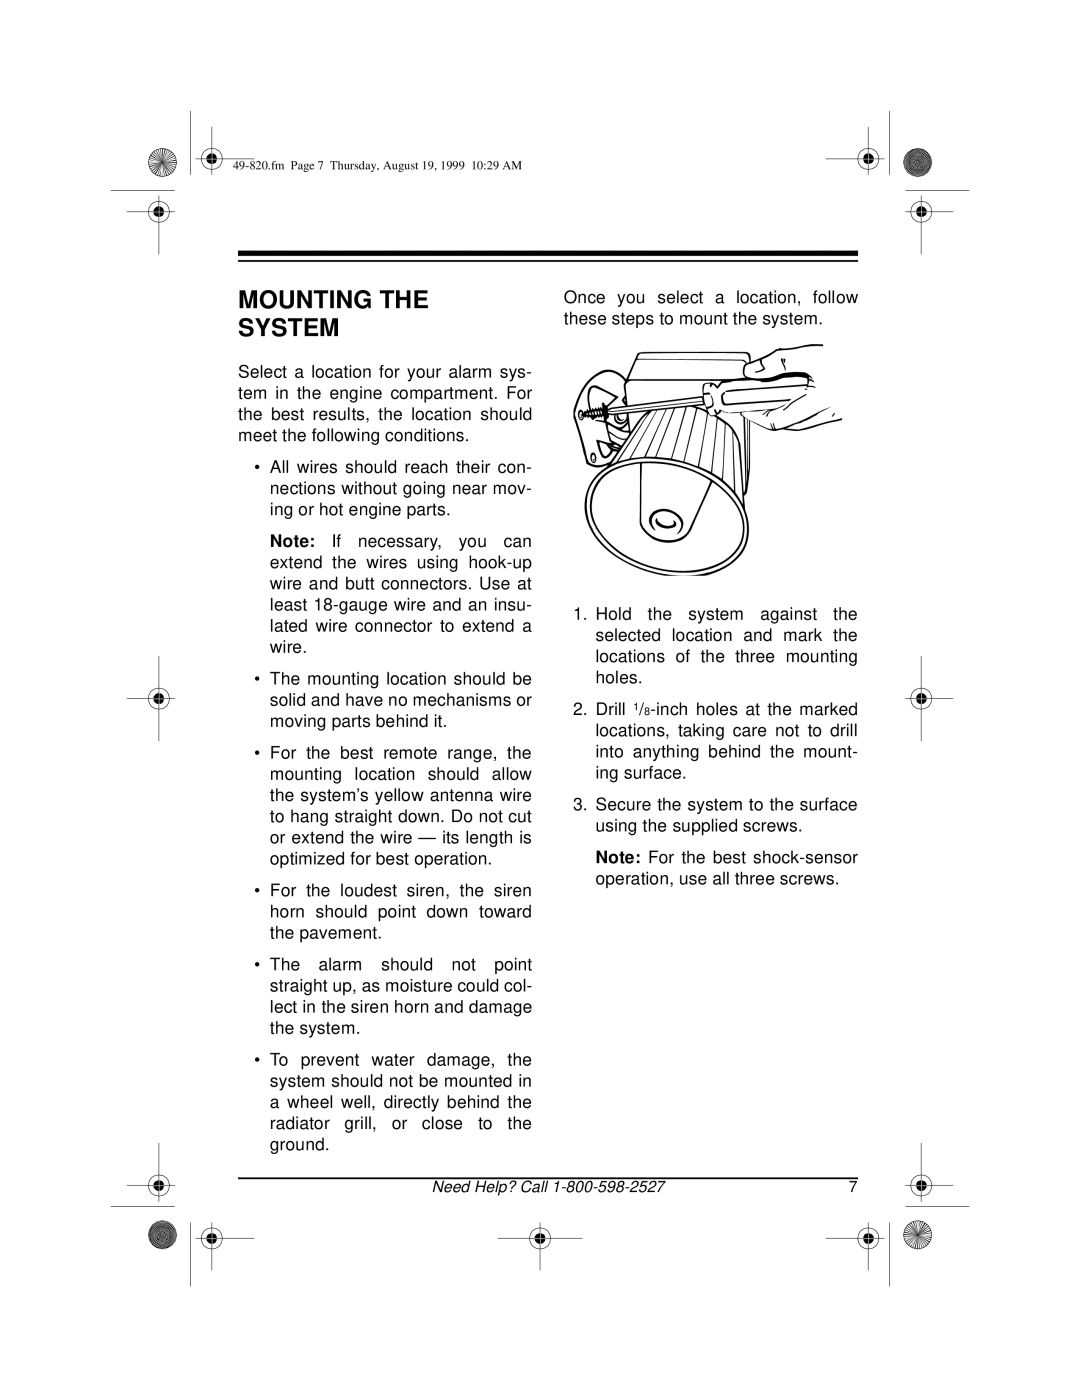 Radio Shack RS-2000 owner manual Mounting The System, Need Help? Call 